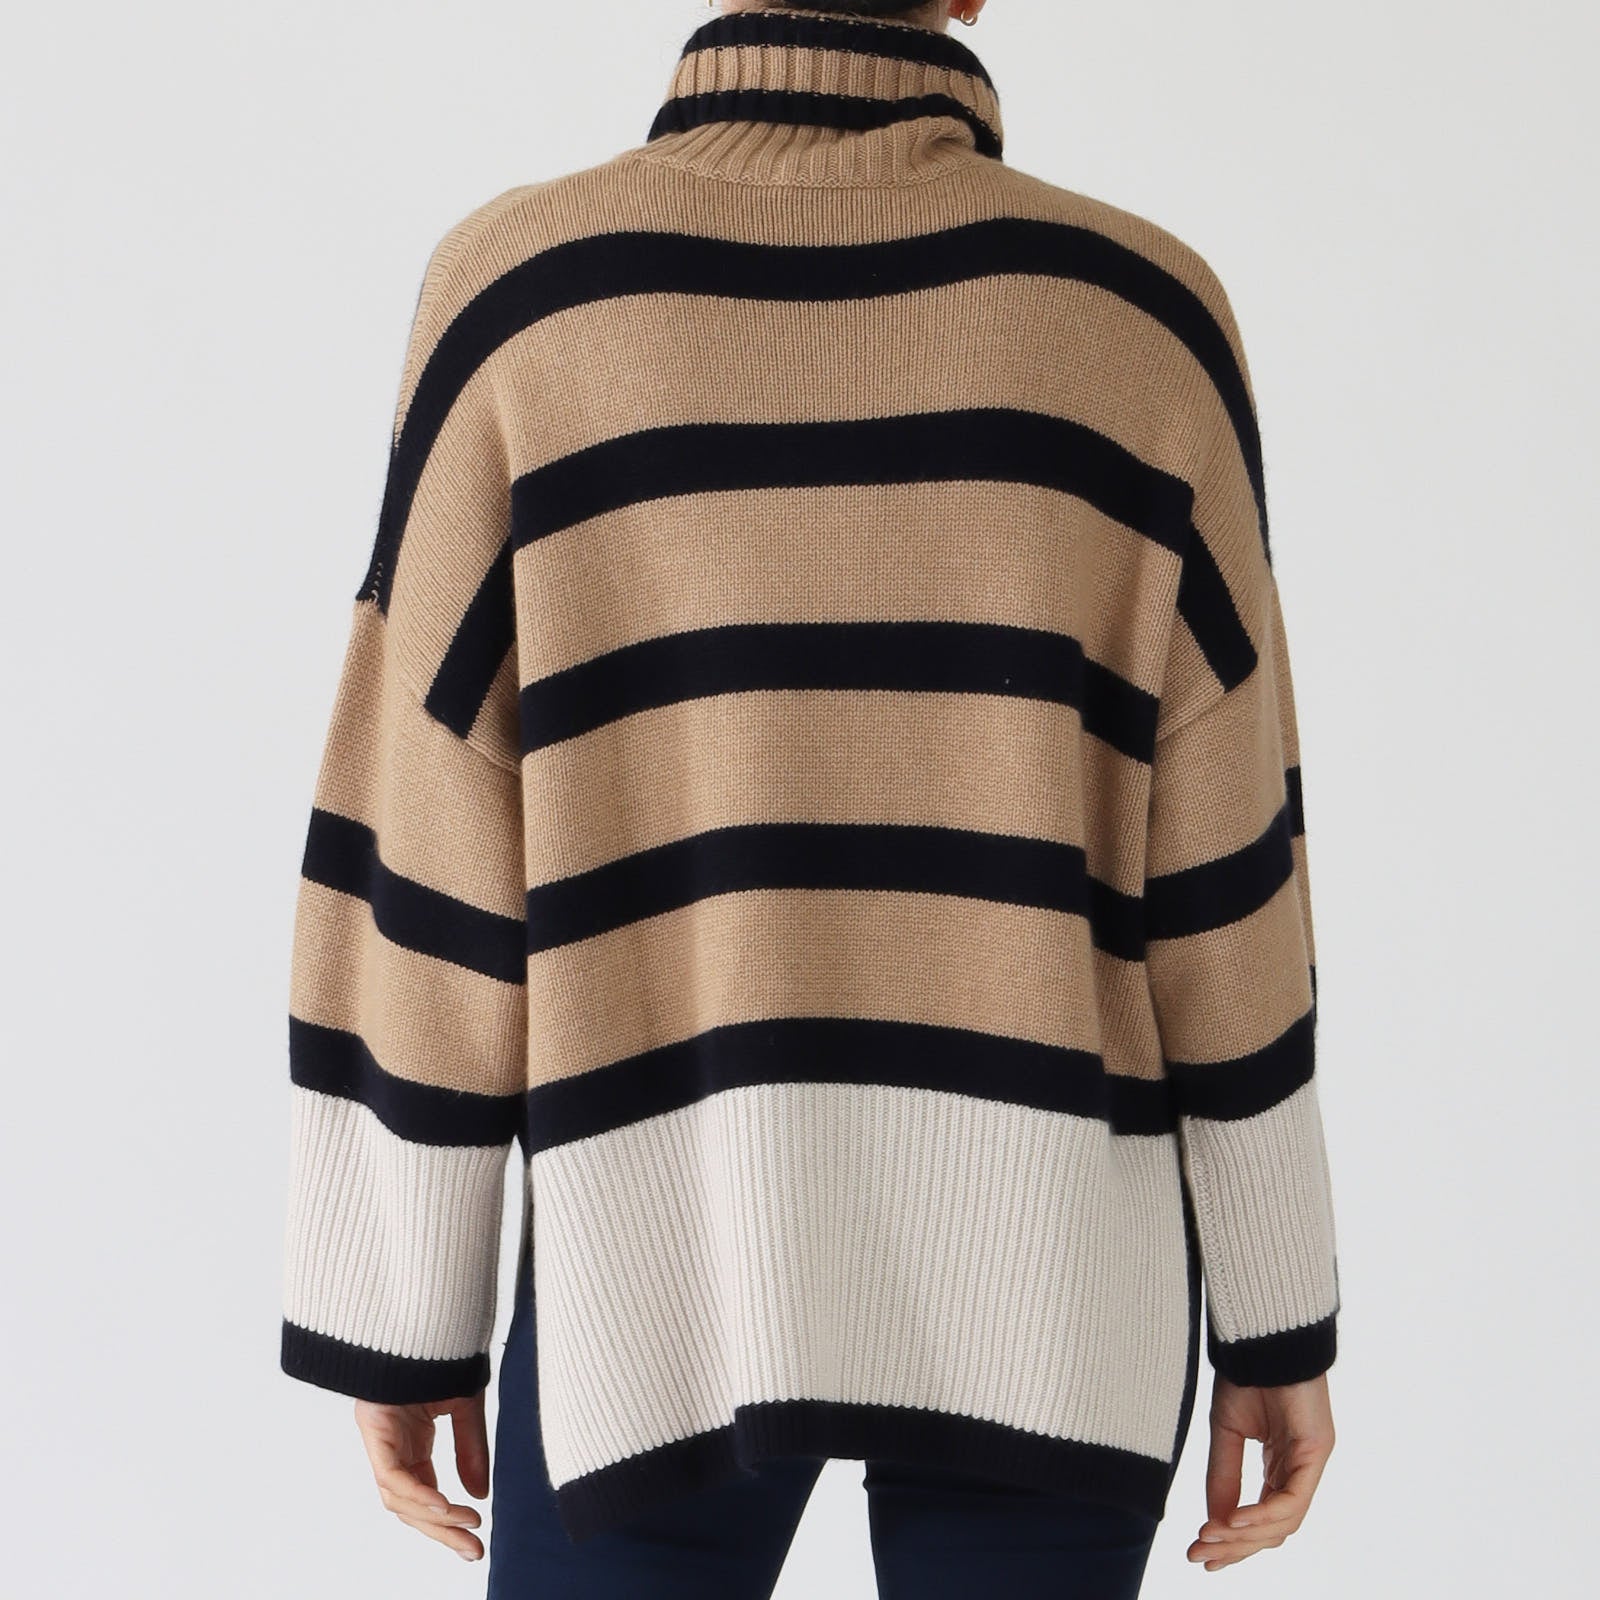 Camel & Peacoat Striped Sweater